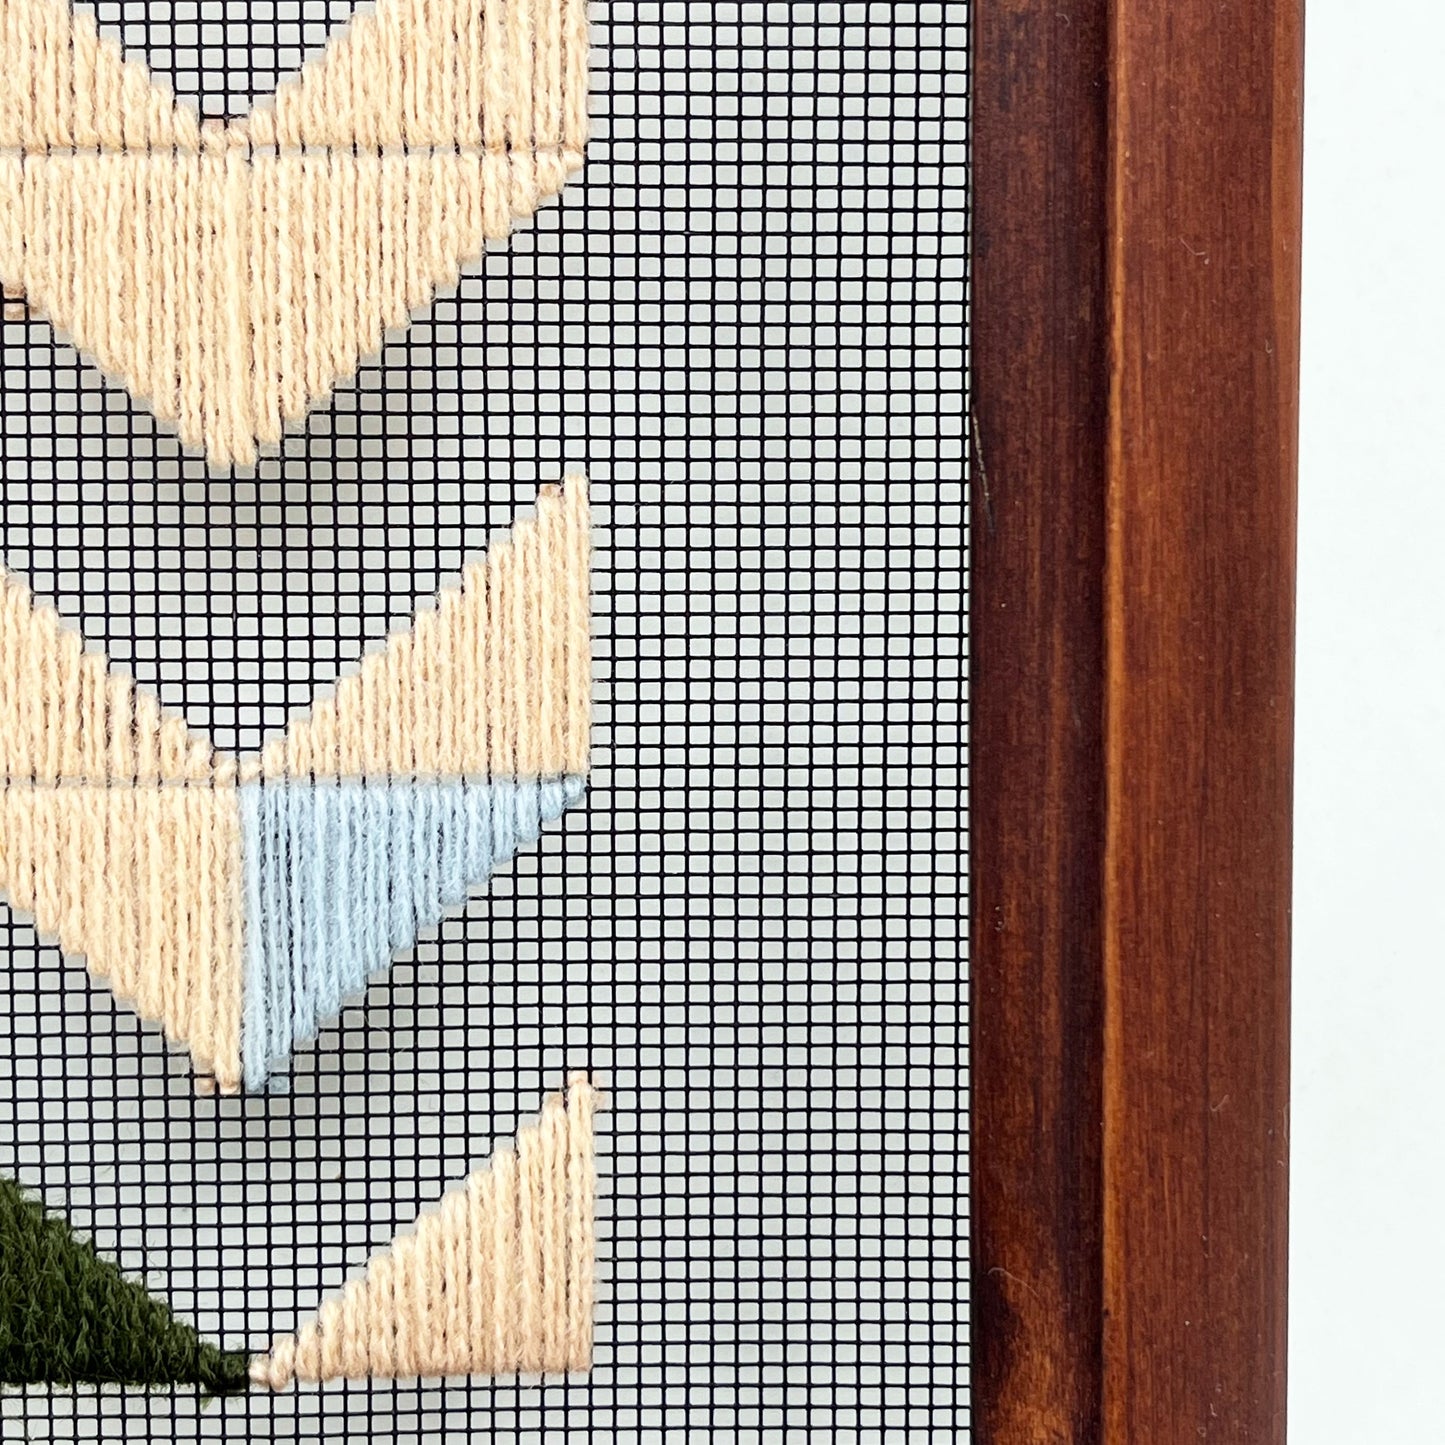 Close up detail of a small wood frame holding window screen hand stitched with triangles forming the shapes of chevrons disappearing off the bottom edge in mostly peach embroidery floss, with accents of light blue and olive green